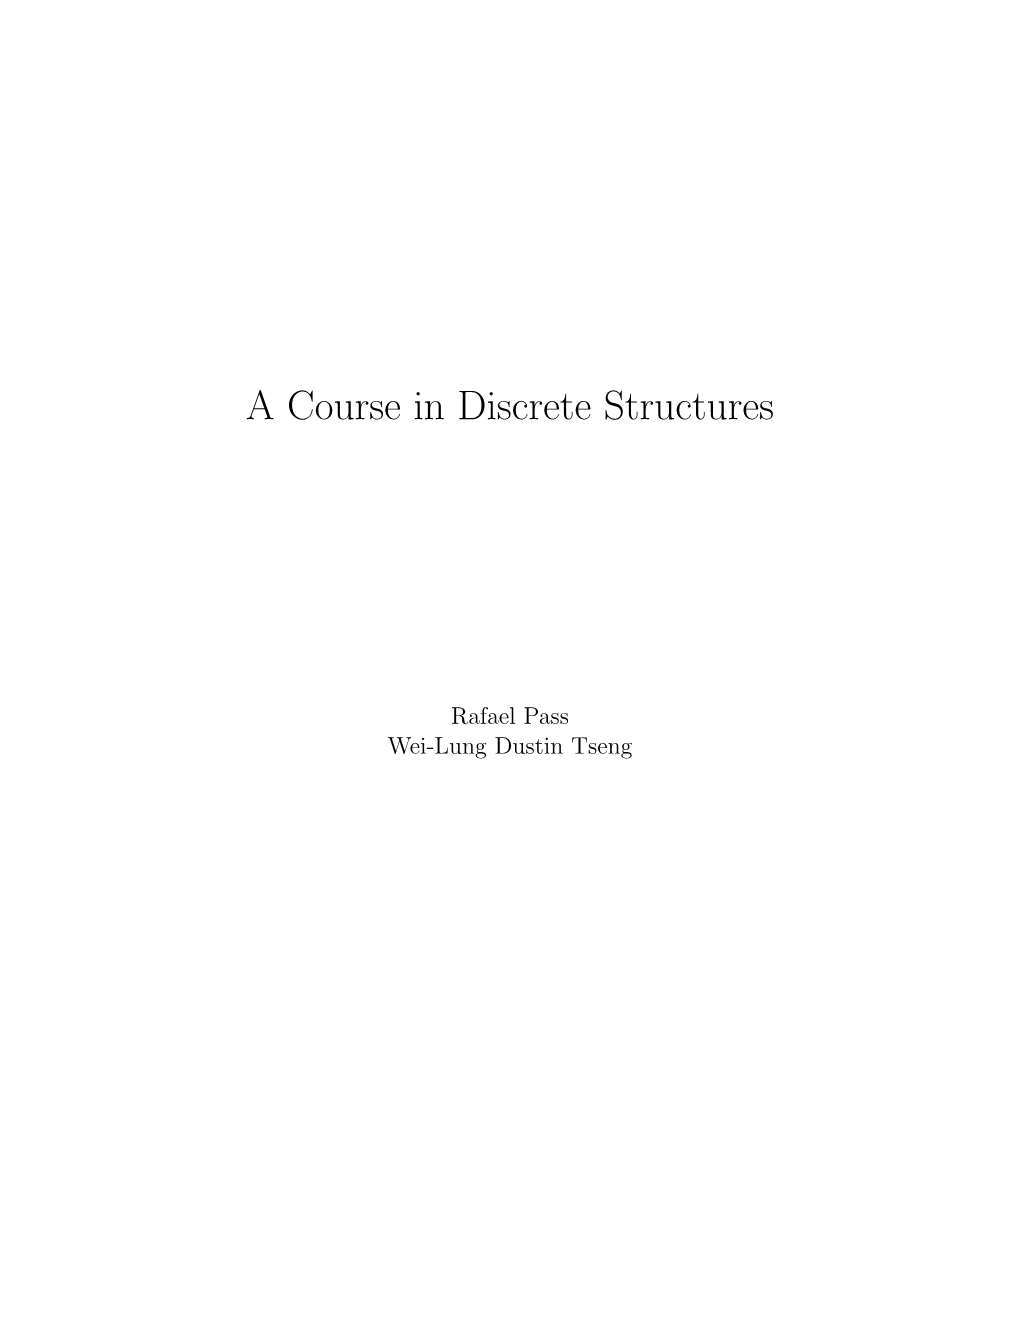 A Course in Discrete Structures